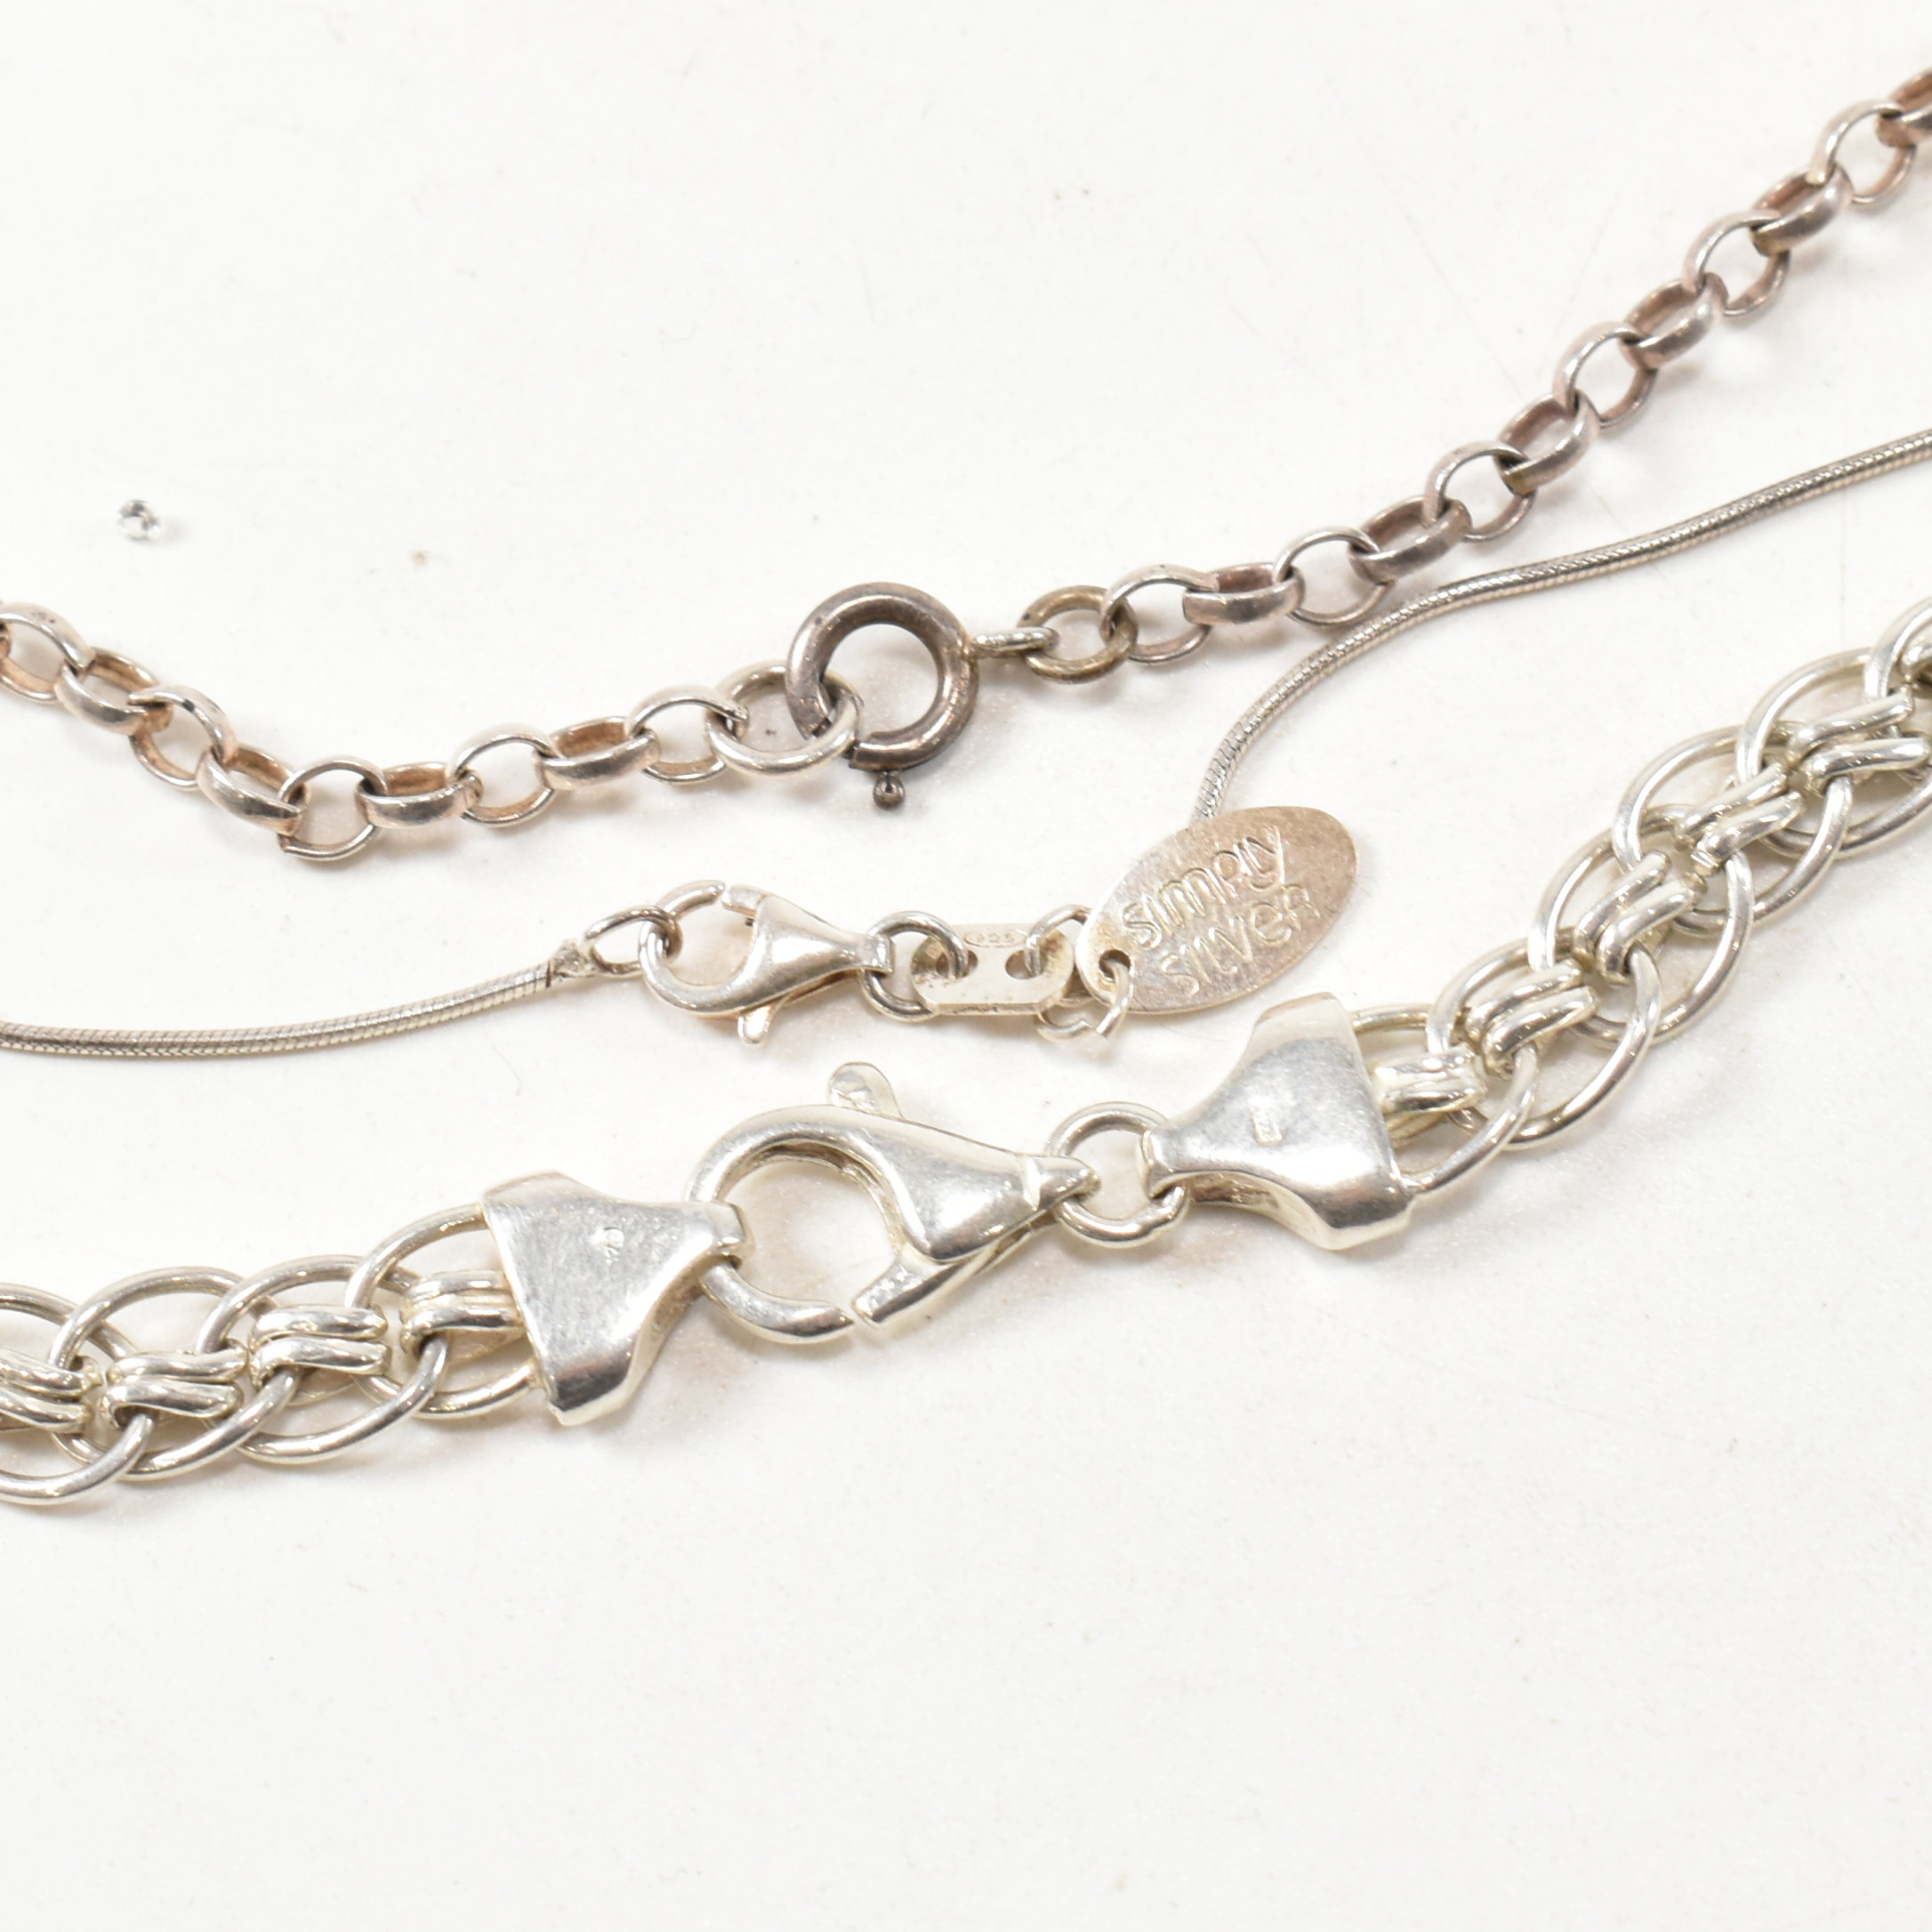 COLLECTION OF SILVER CHAINS & PENDANT NECKLACE - Image 4 of 4